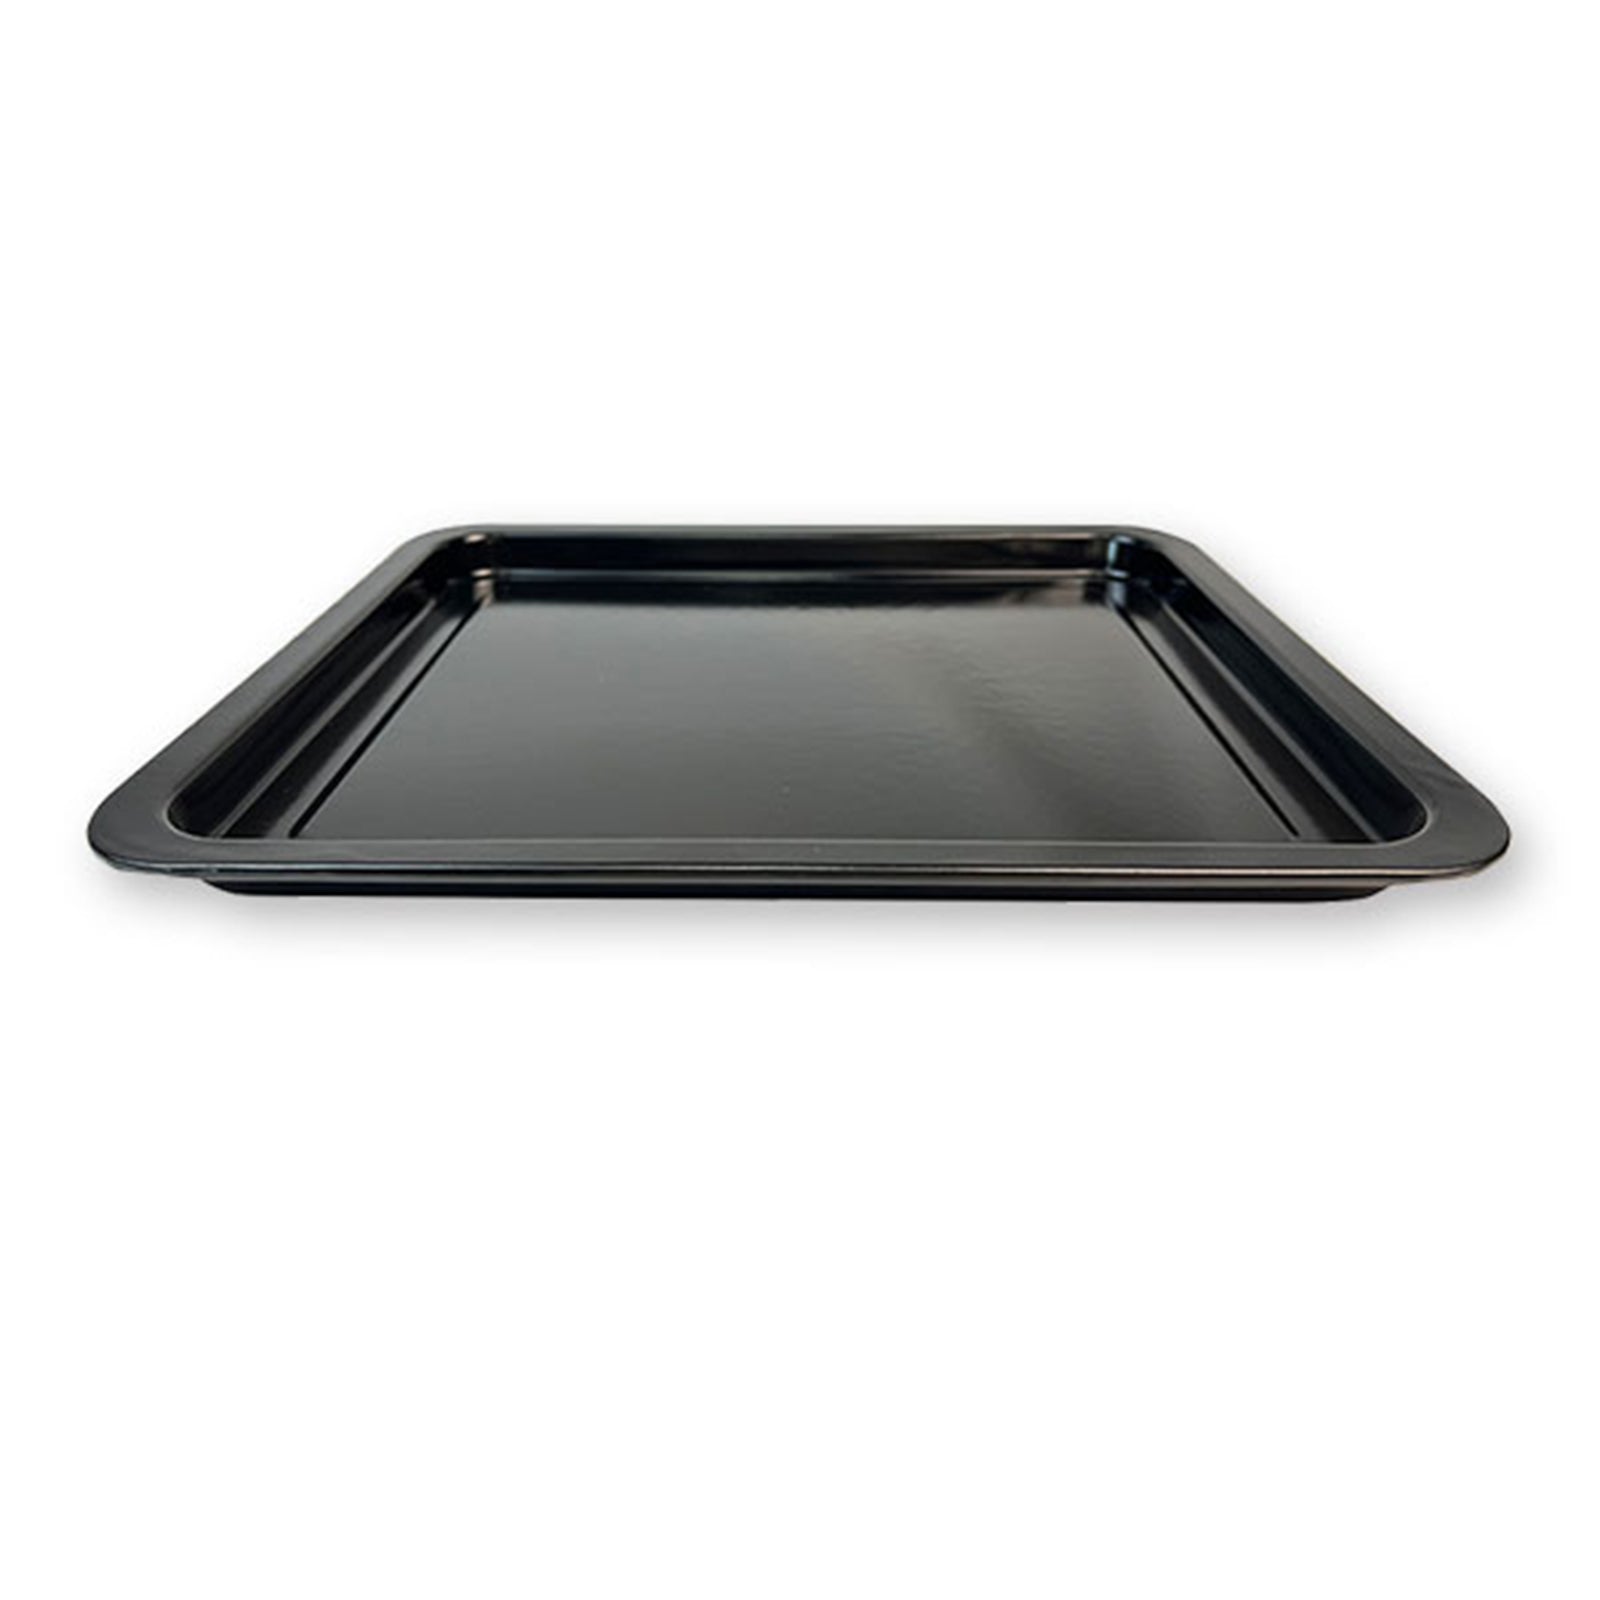 HYSapientia 24L Air Fryer Oven Accessories Baking Tray